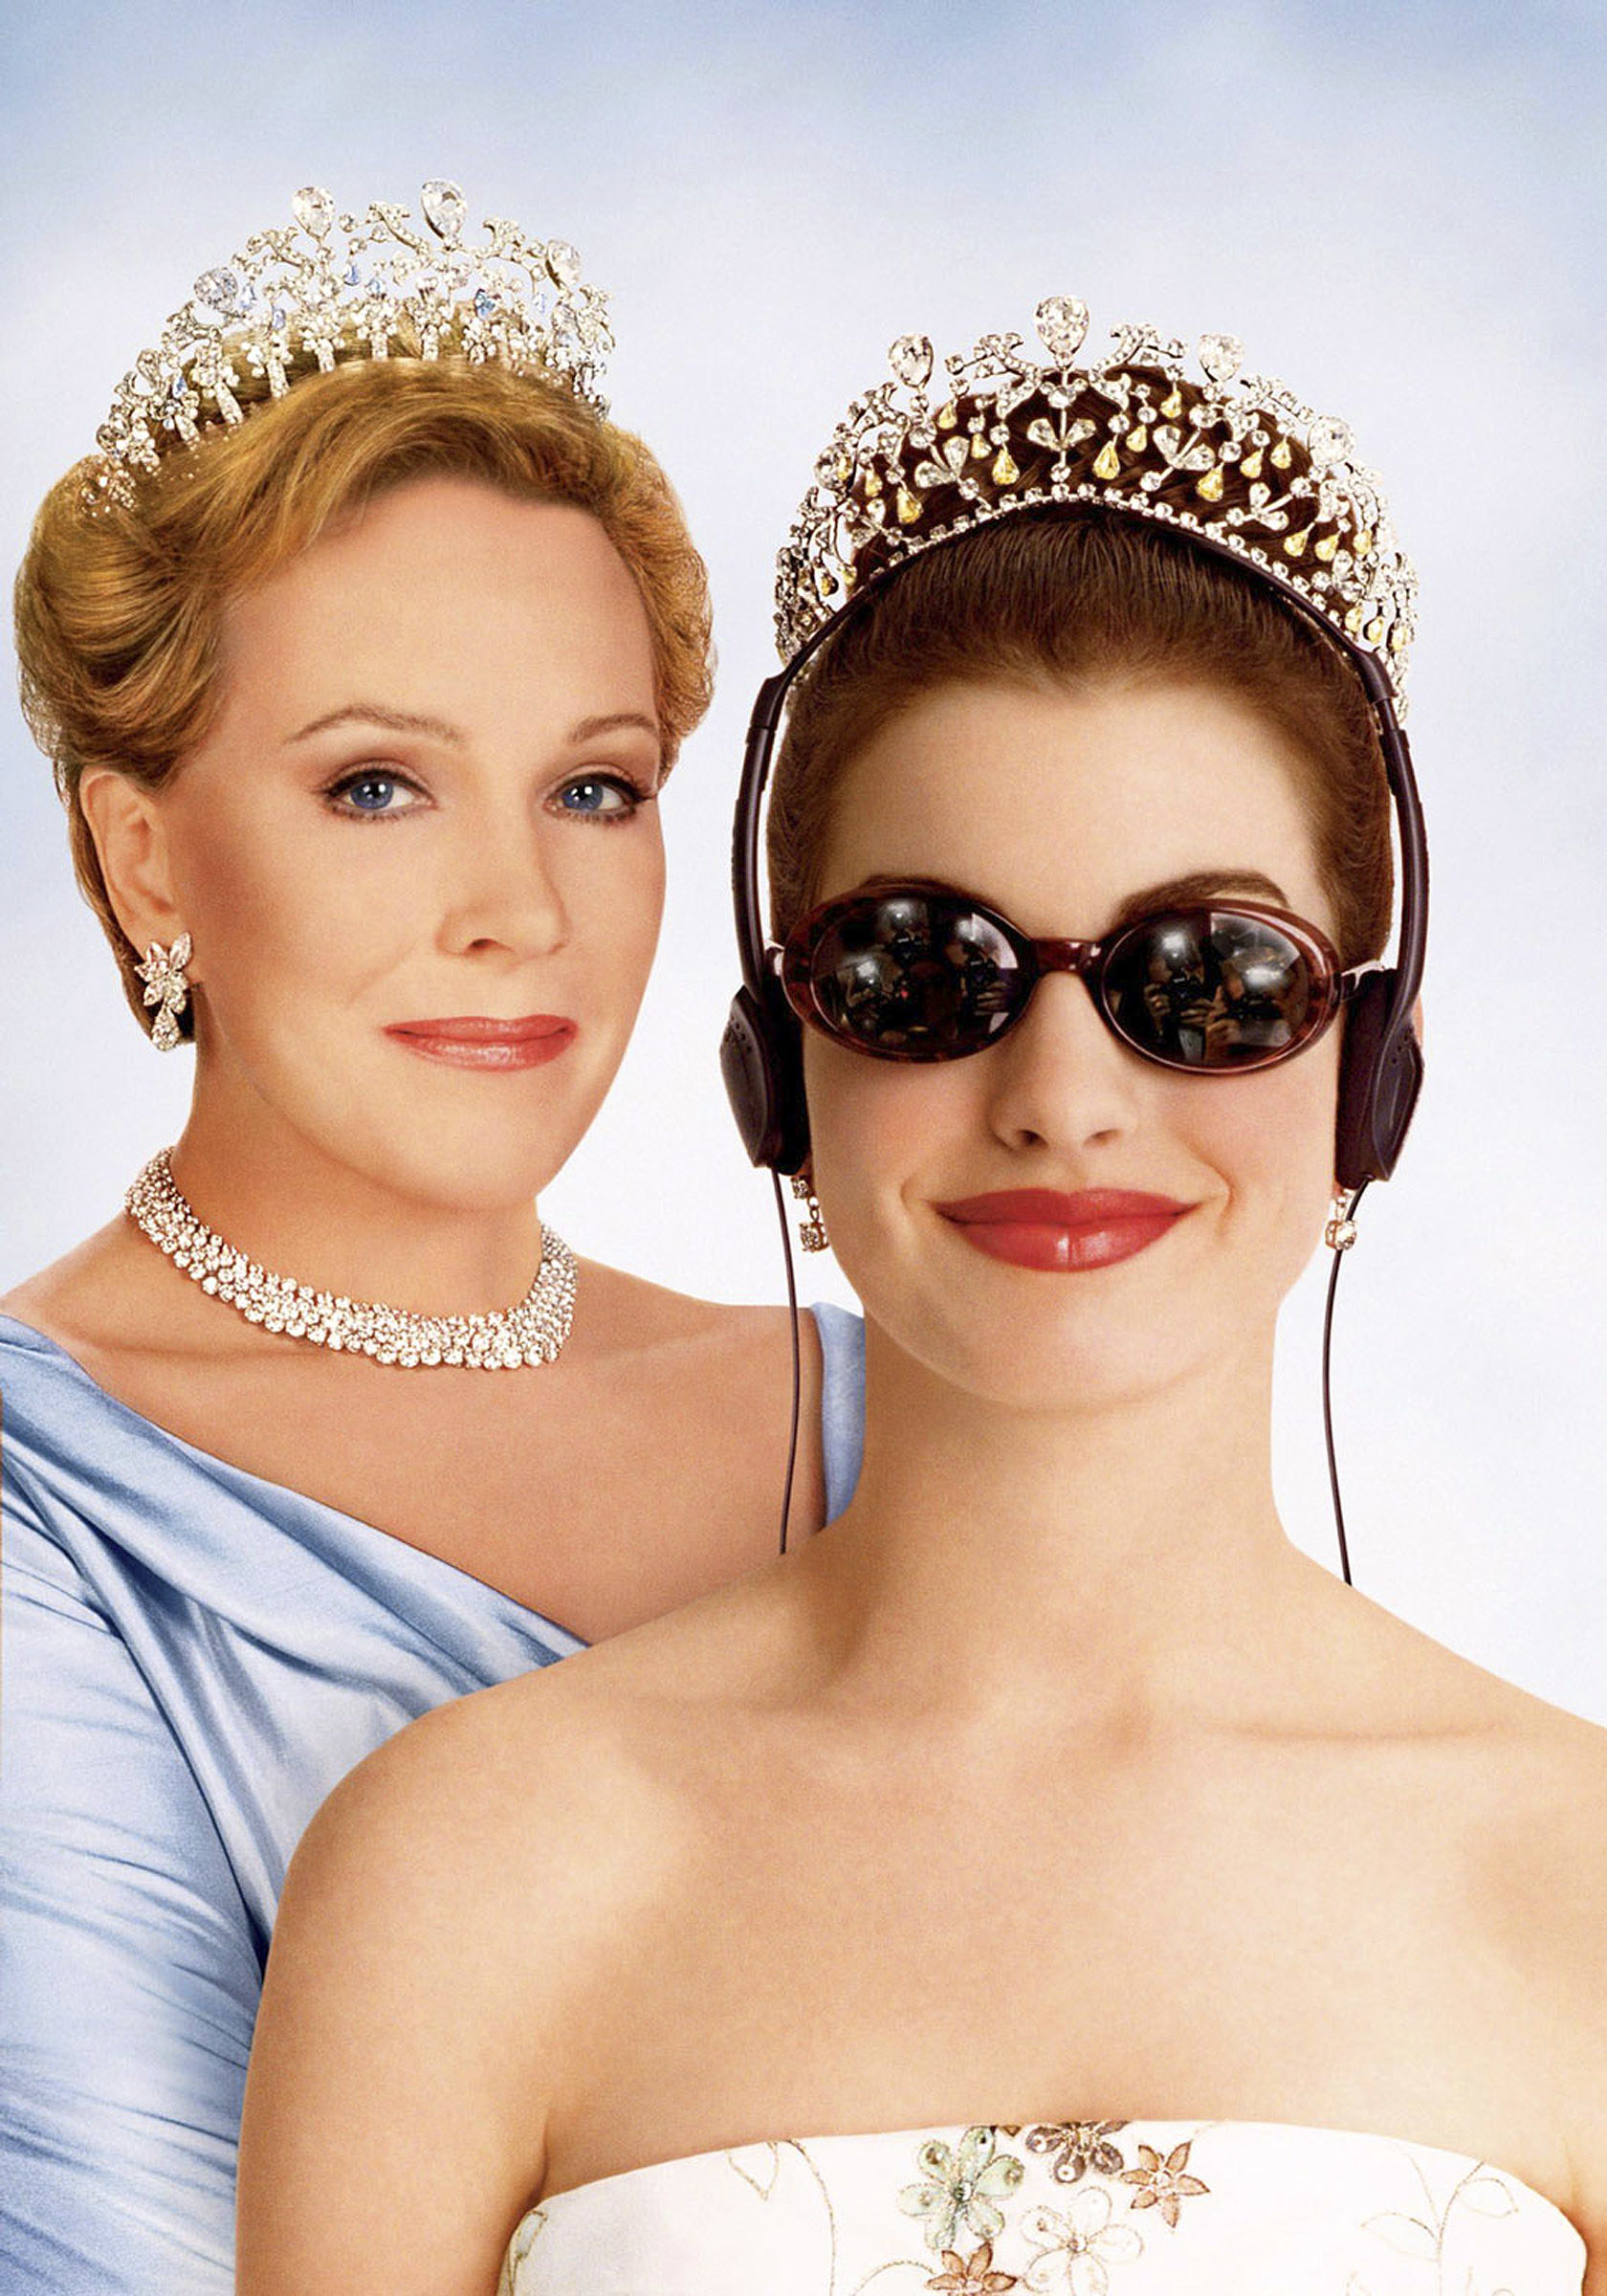 The Princess Diaries" Outfit Ranking